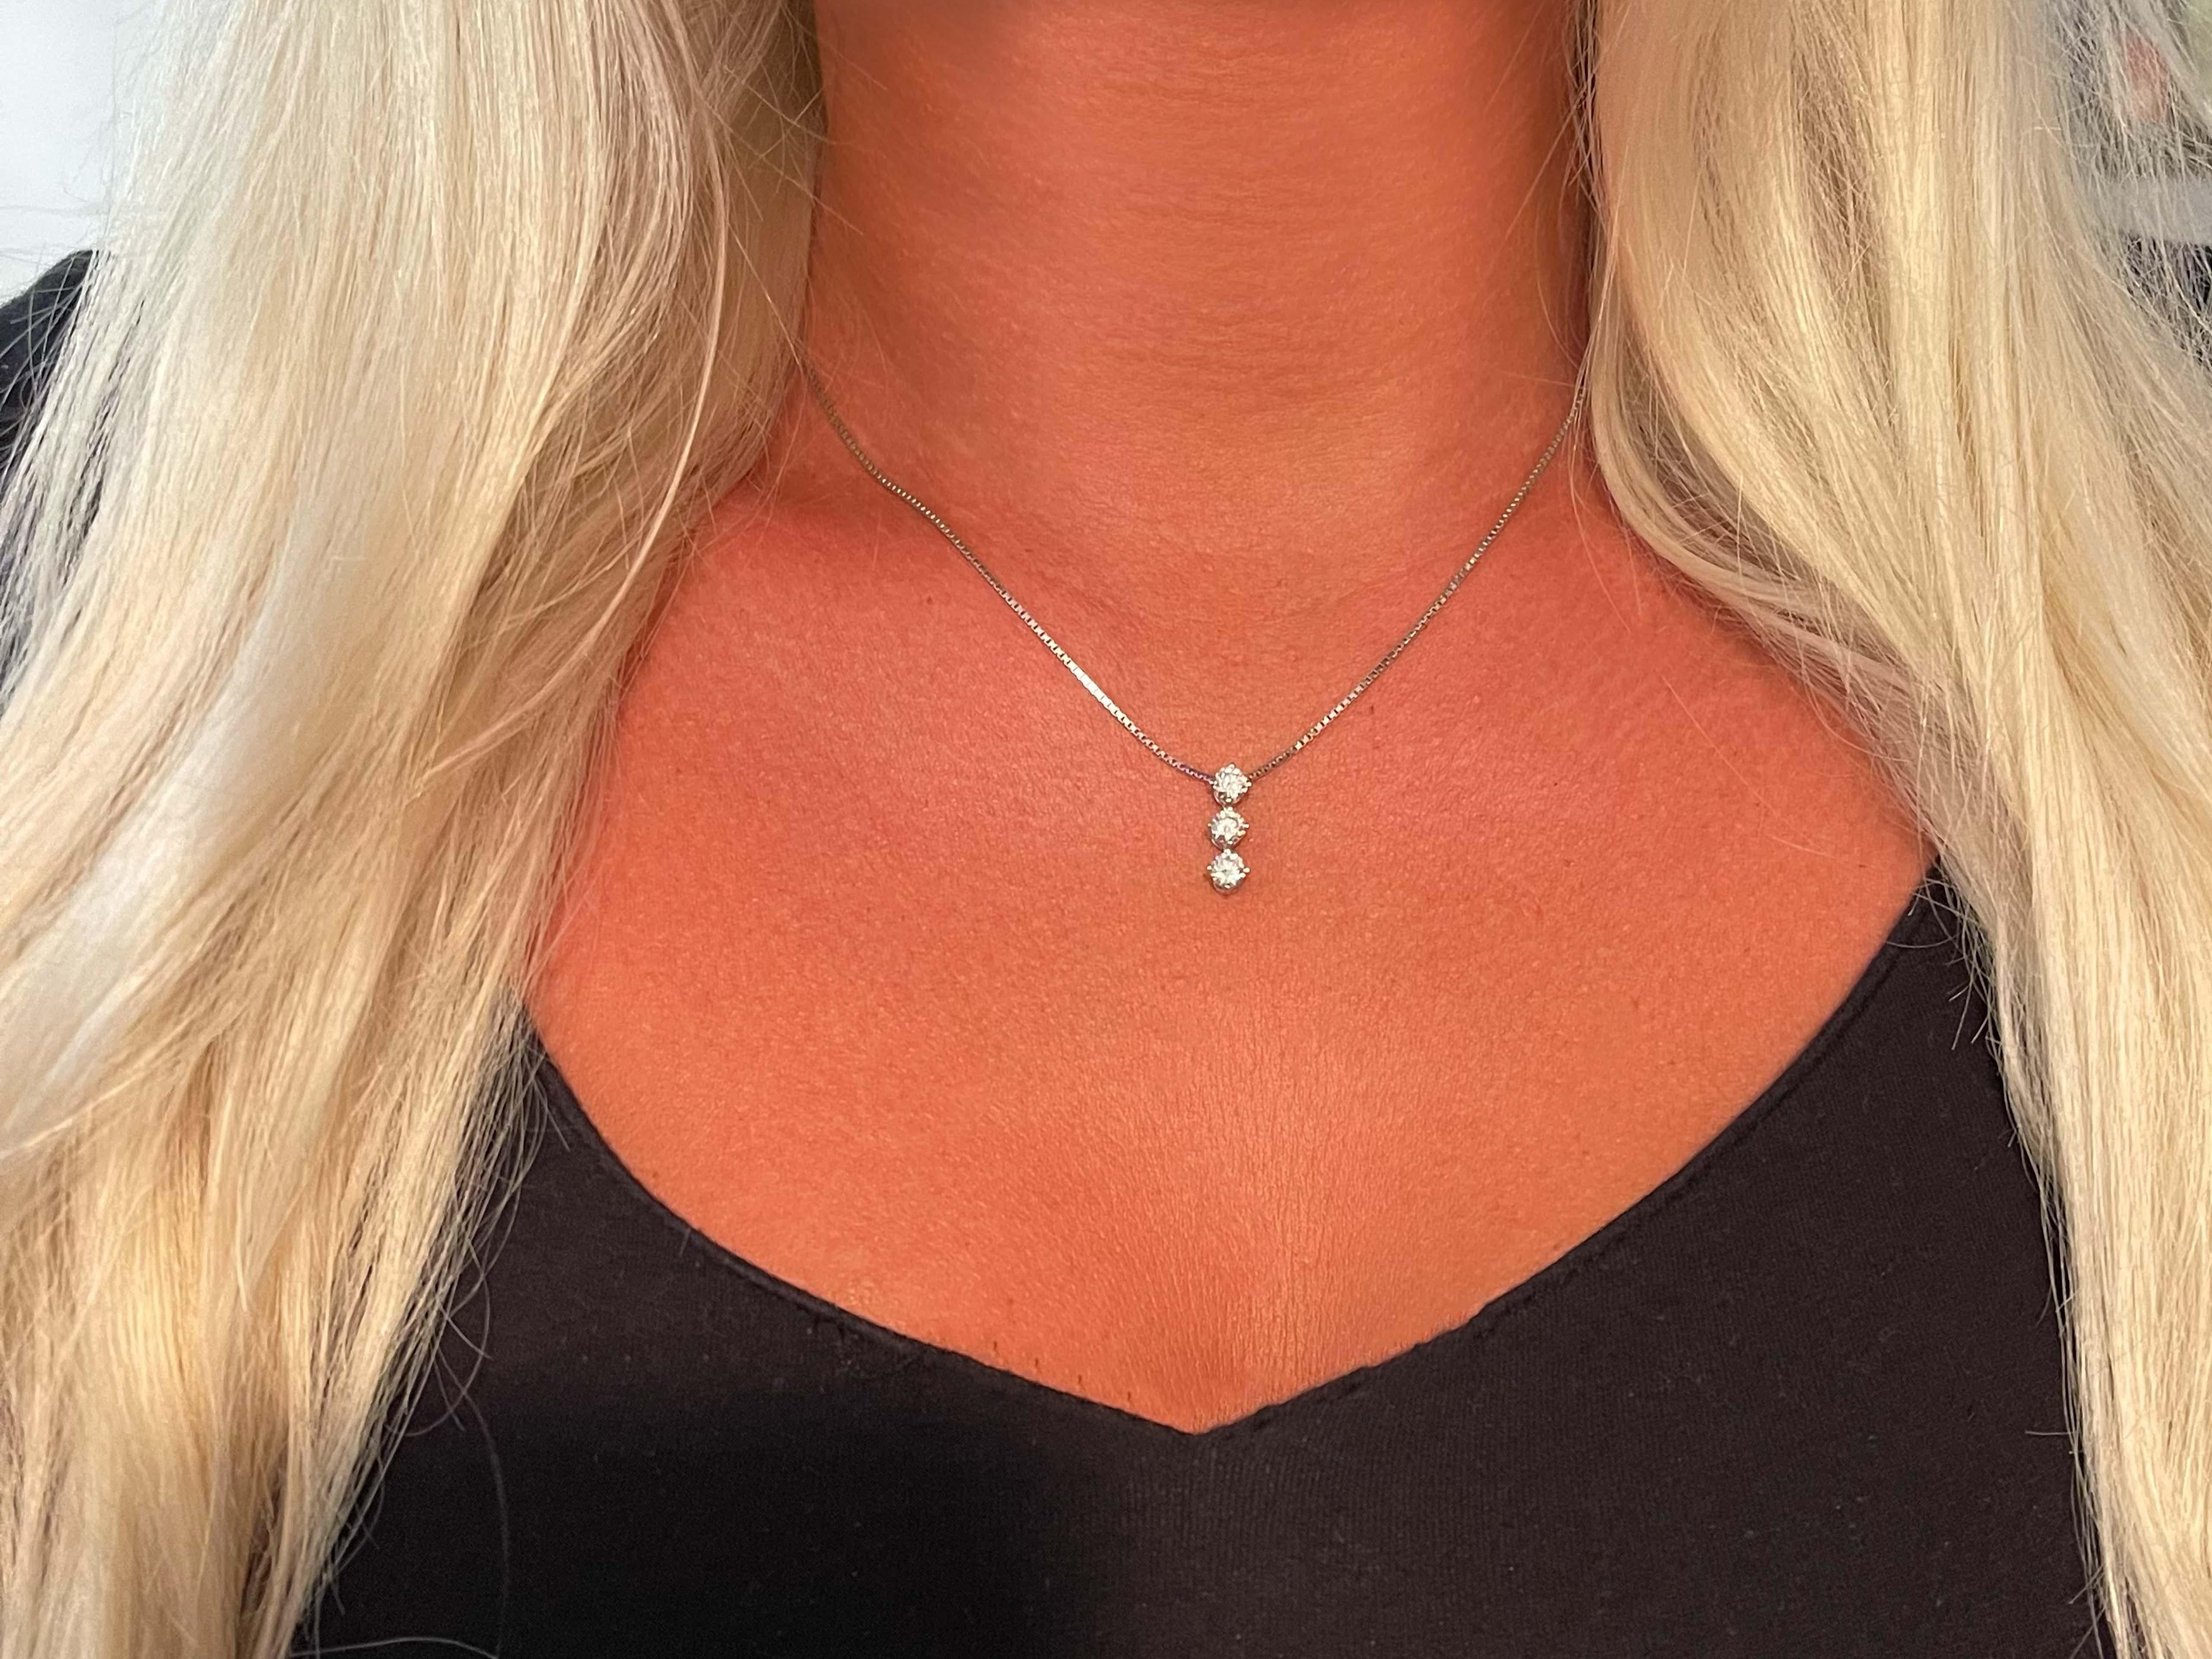 Trilogy 3 Diamond Drop Necklace in Platinum. The 3 round brilliant cut diamonds are G in color with the top diamond SI2 in clarity and the two below, SI1. The diamonds weigh a total of 1.09 carats and have amazing sparkle. Each diamond has its